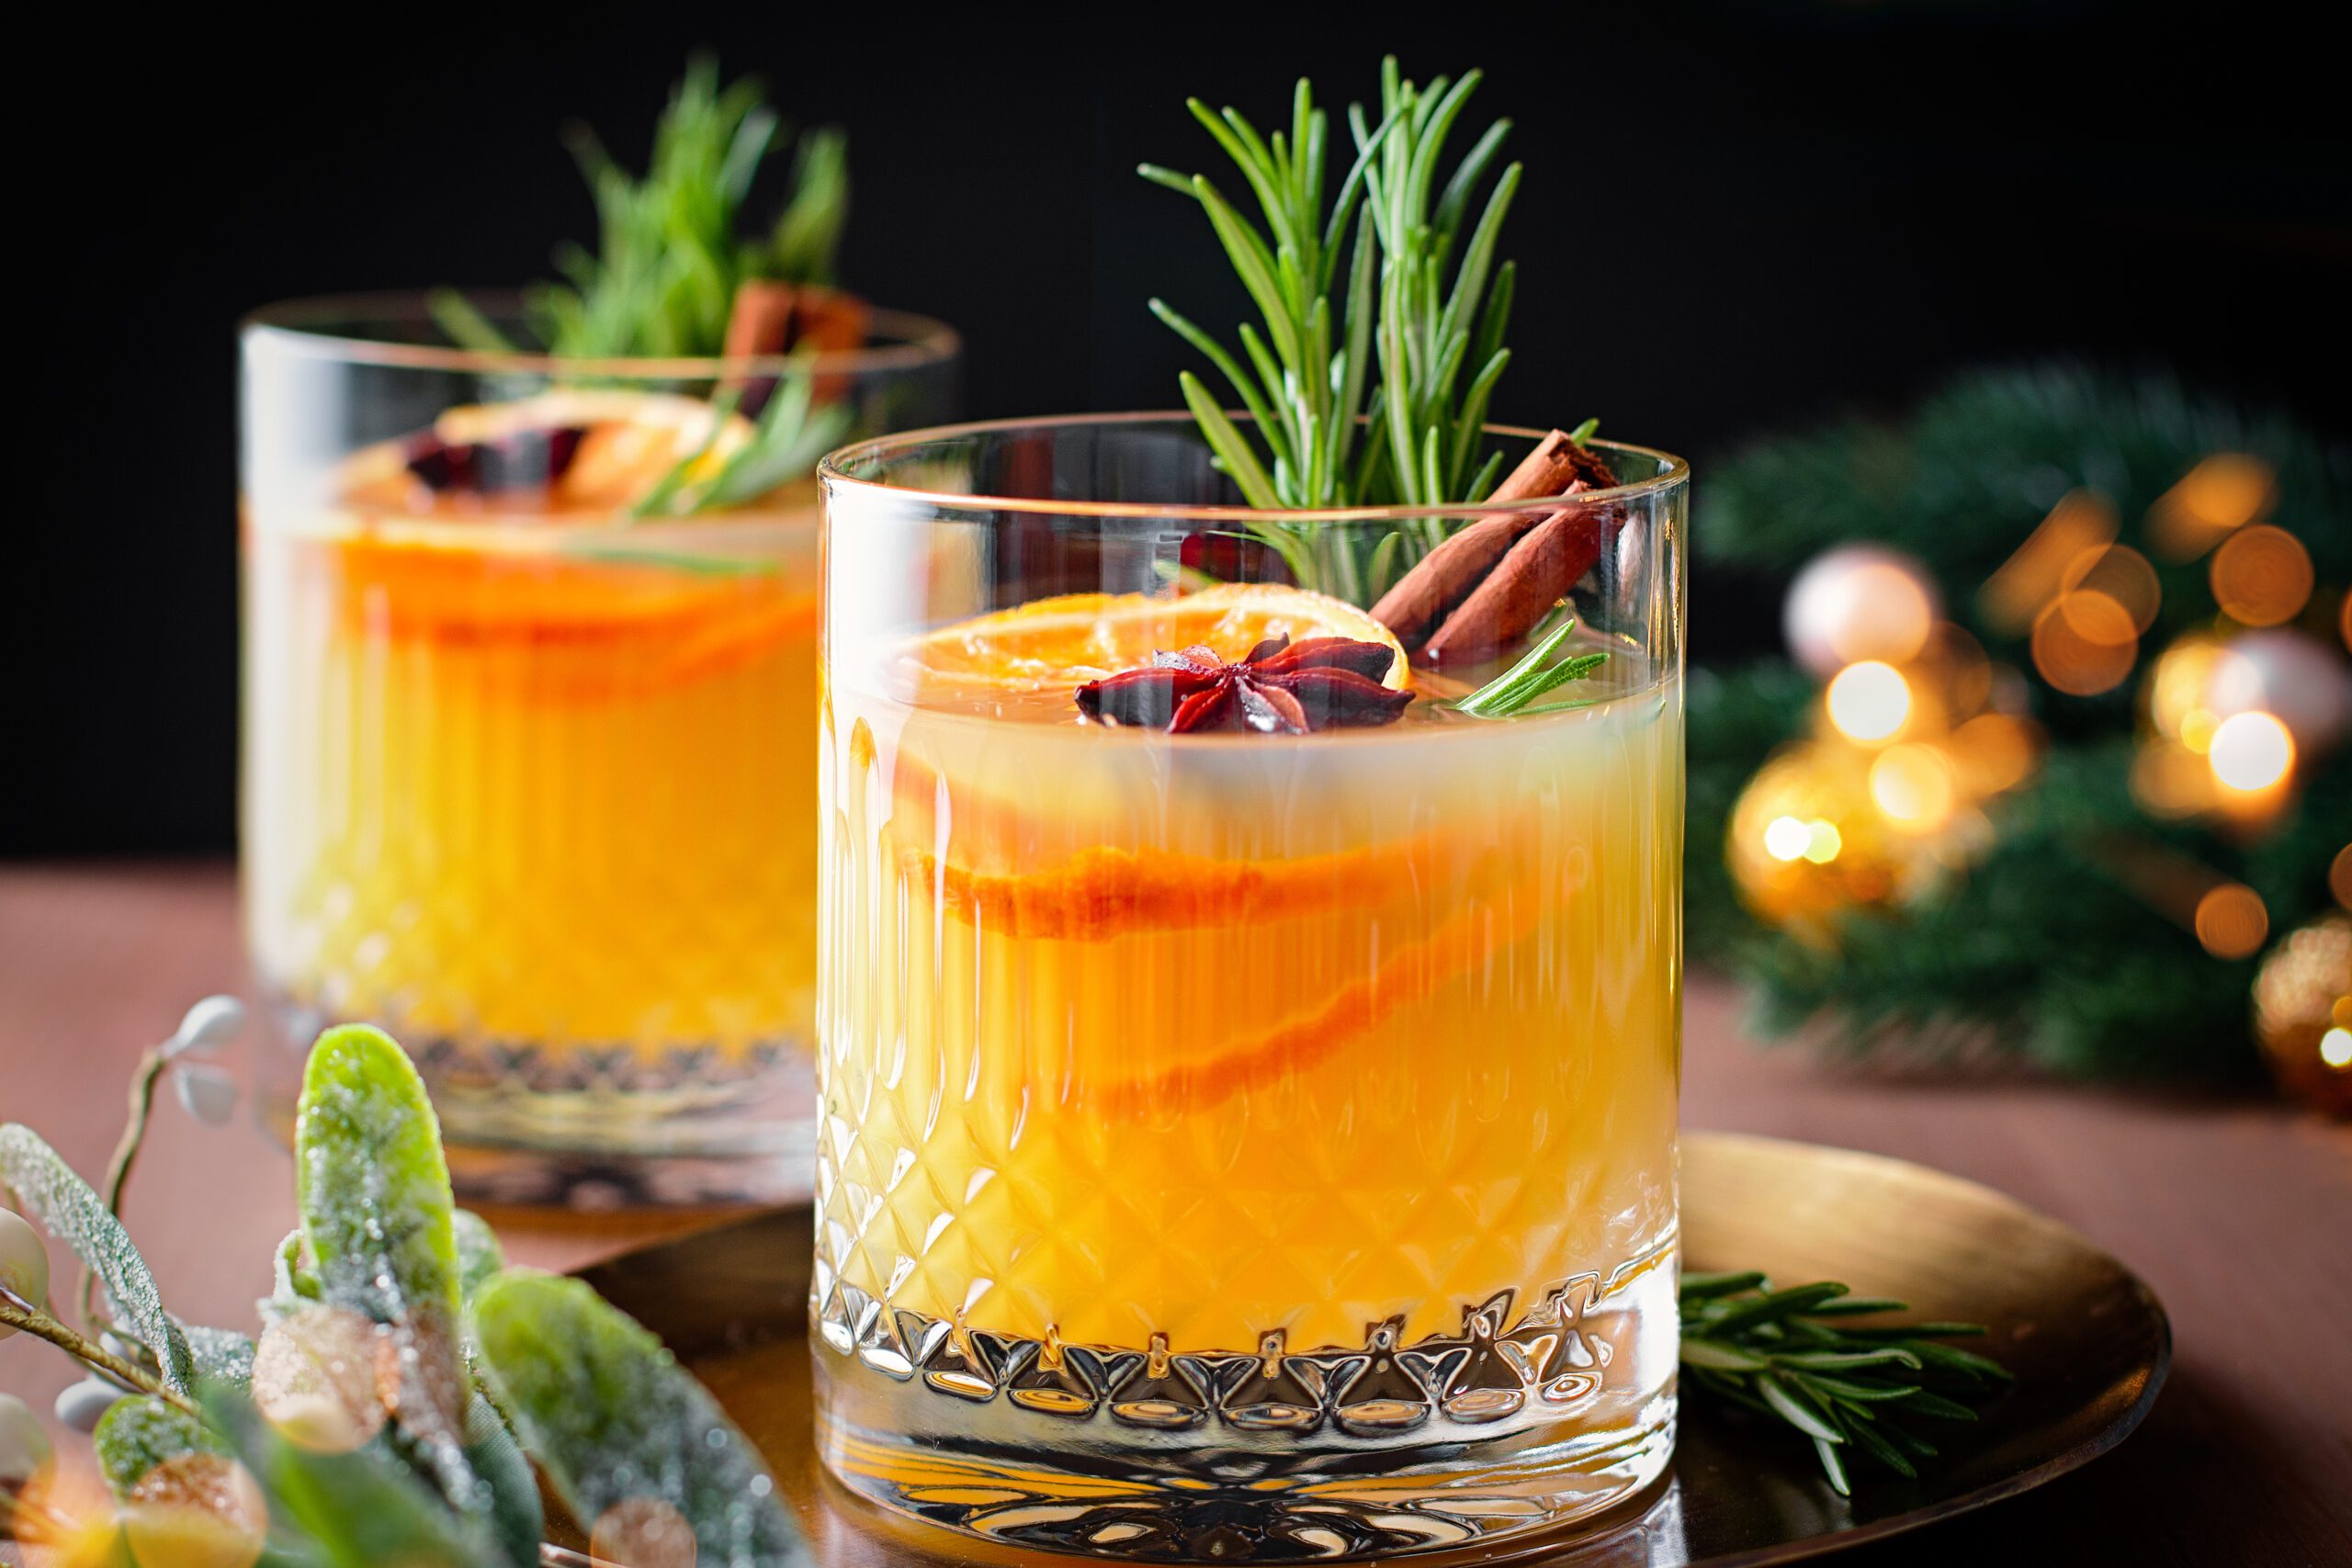 Christmas or winter warming bourbon old fashioned with oranges, cinnamon and rosemary on wooden table with tree branches and golden decor, top view